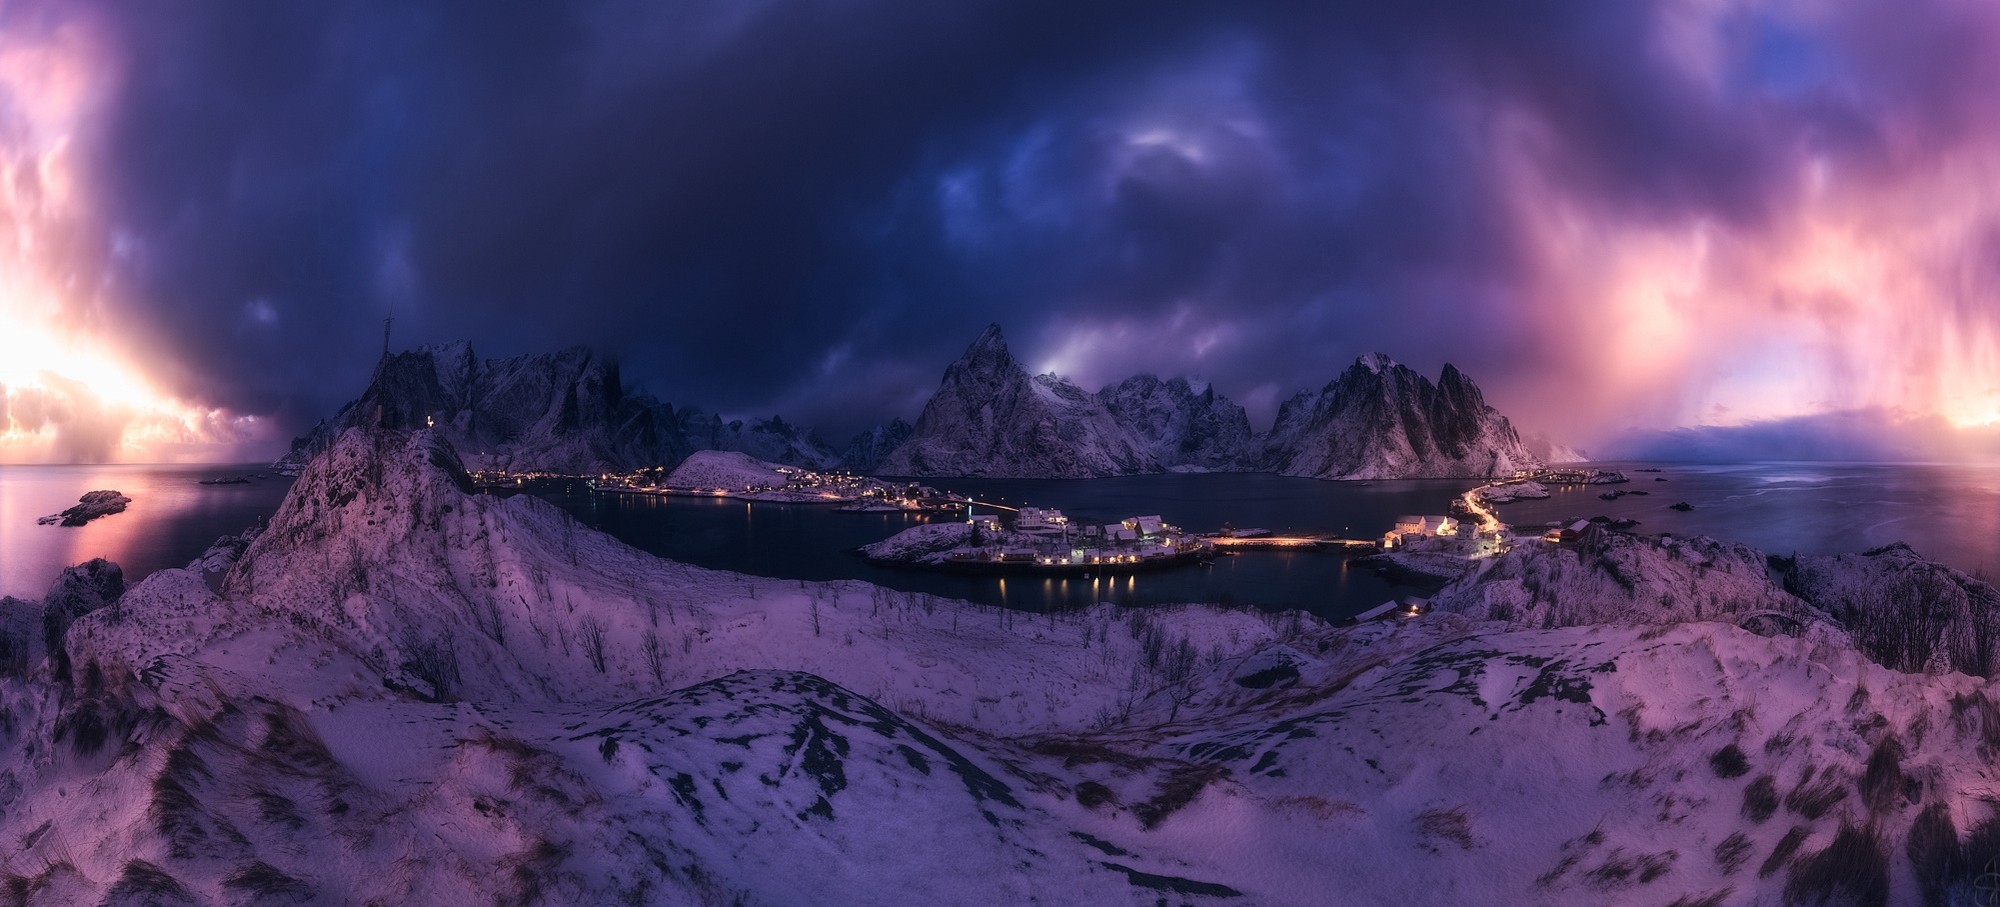 General 2000x907 nature landscape Reine Lofoten Norway panorama winter lights snow mountains sea clouds sky cold